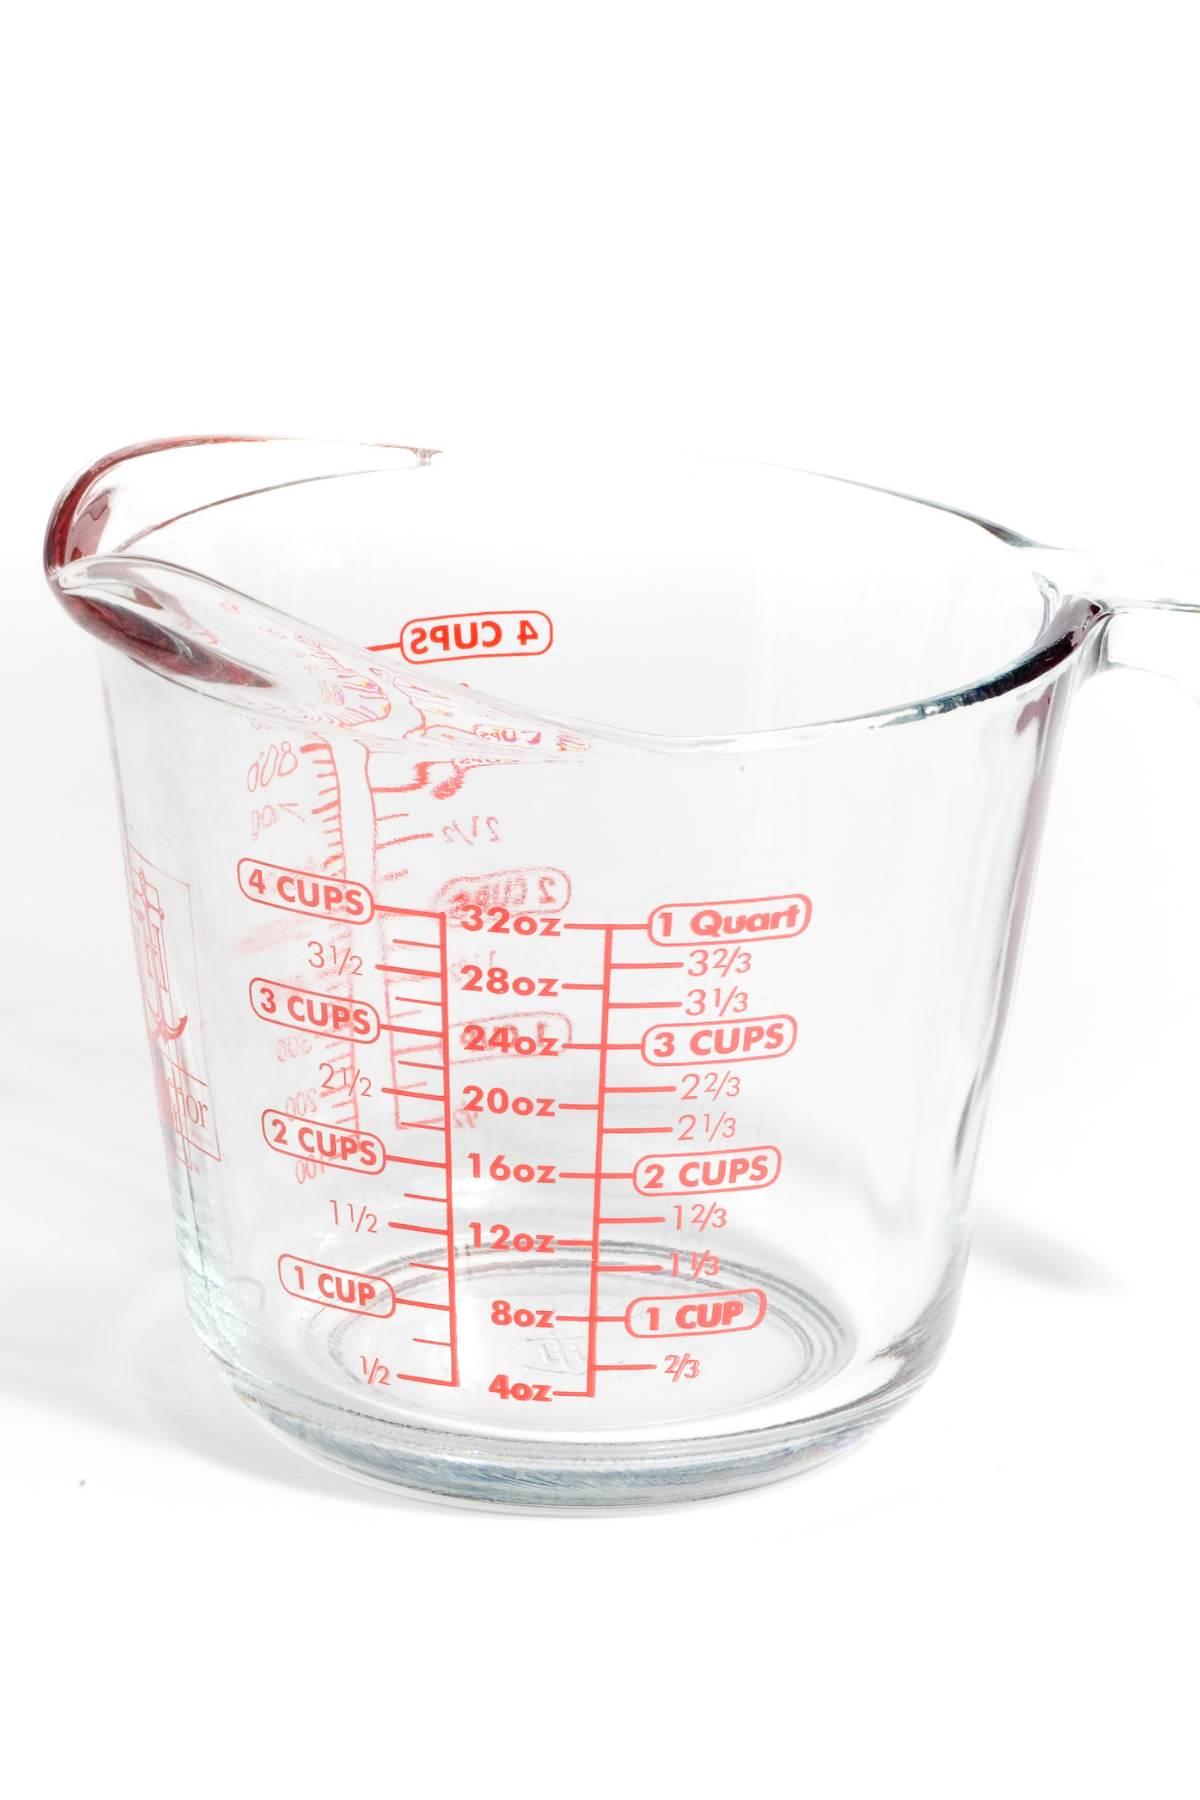 If you’re wondering how many cups are in a gallon, then look no further. We’ve got conversions of cups to gallons along with handy measuring tips!